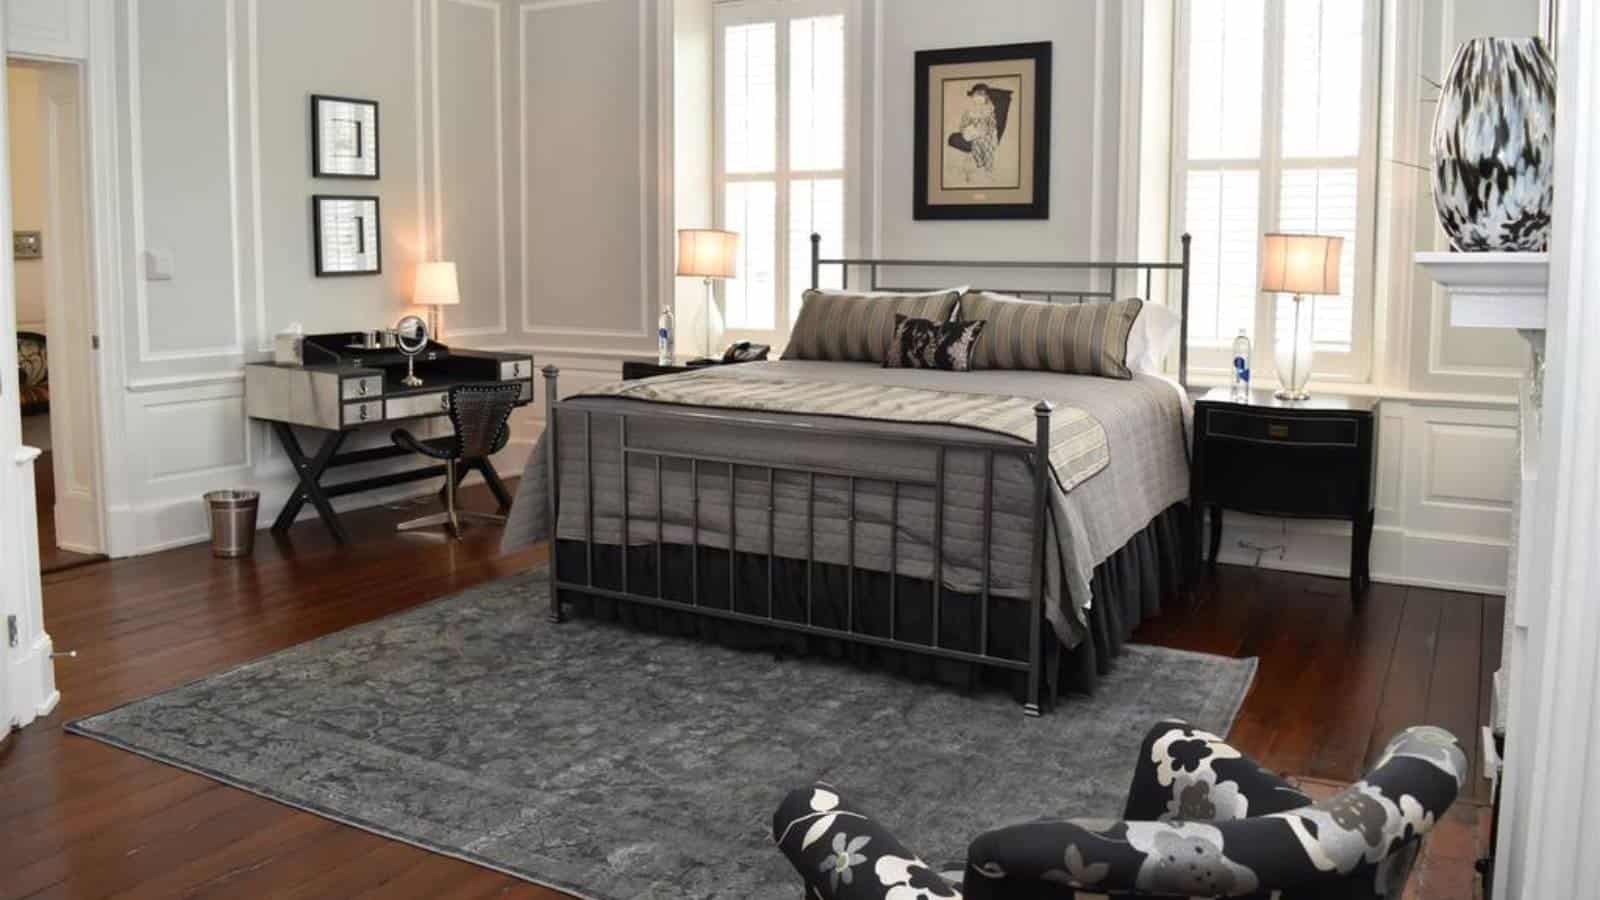 Bedroom with paneled walls, hardwood flooring, gray wrought iron bed with gray bedding, desk, and upholstered arm chair